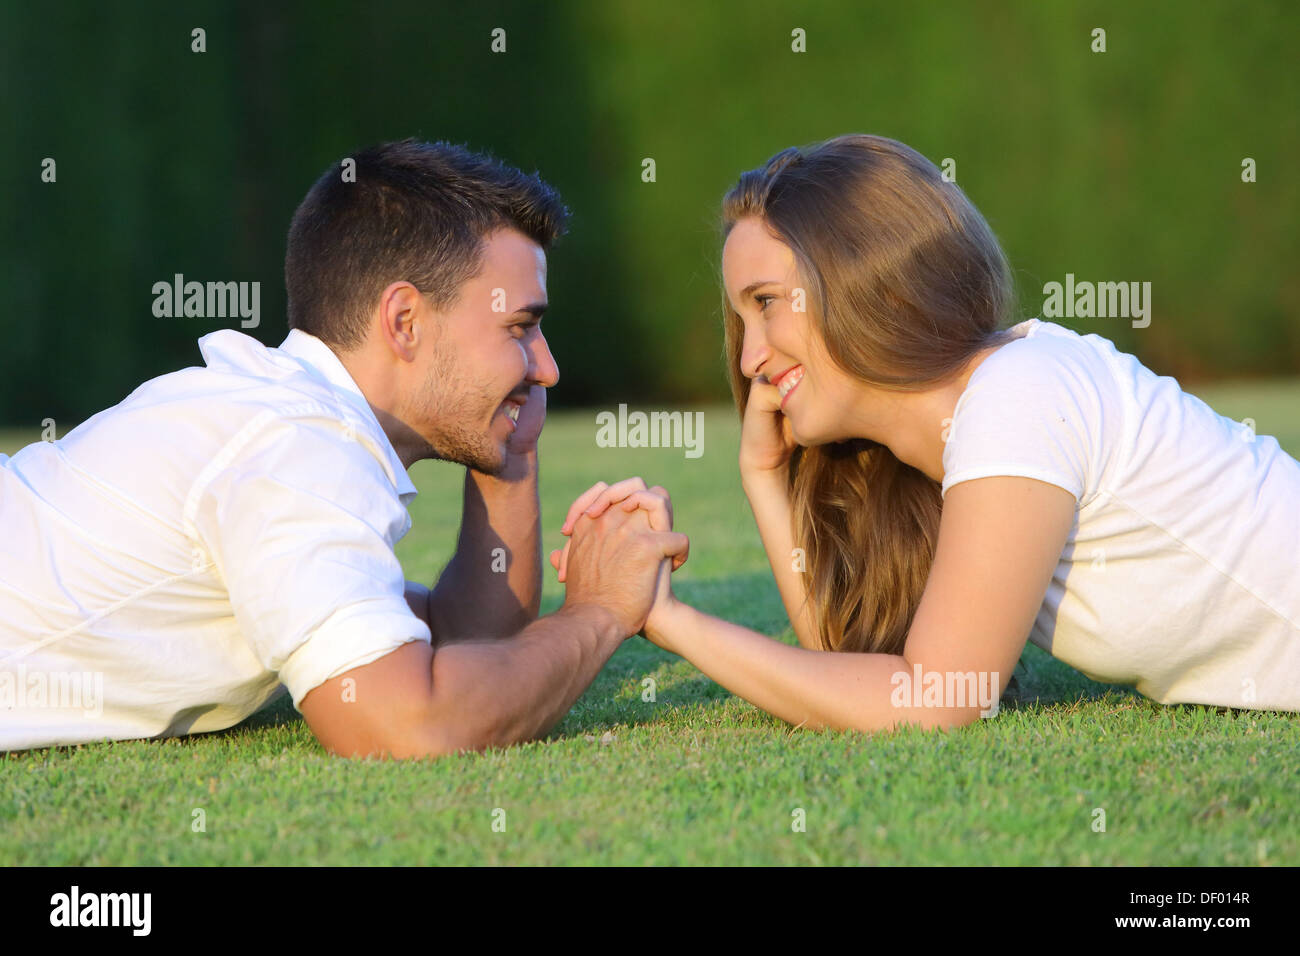 Profile of a couple in love flirting and looking each other lying on the grass with a green background Stock Photo